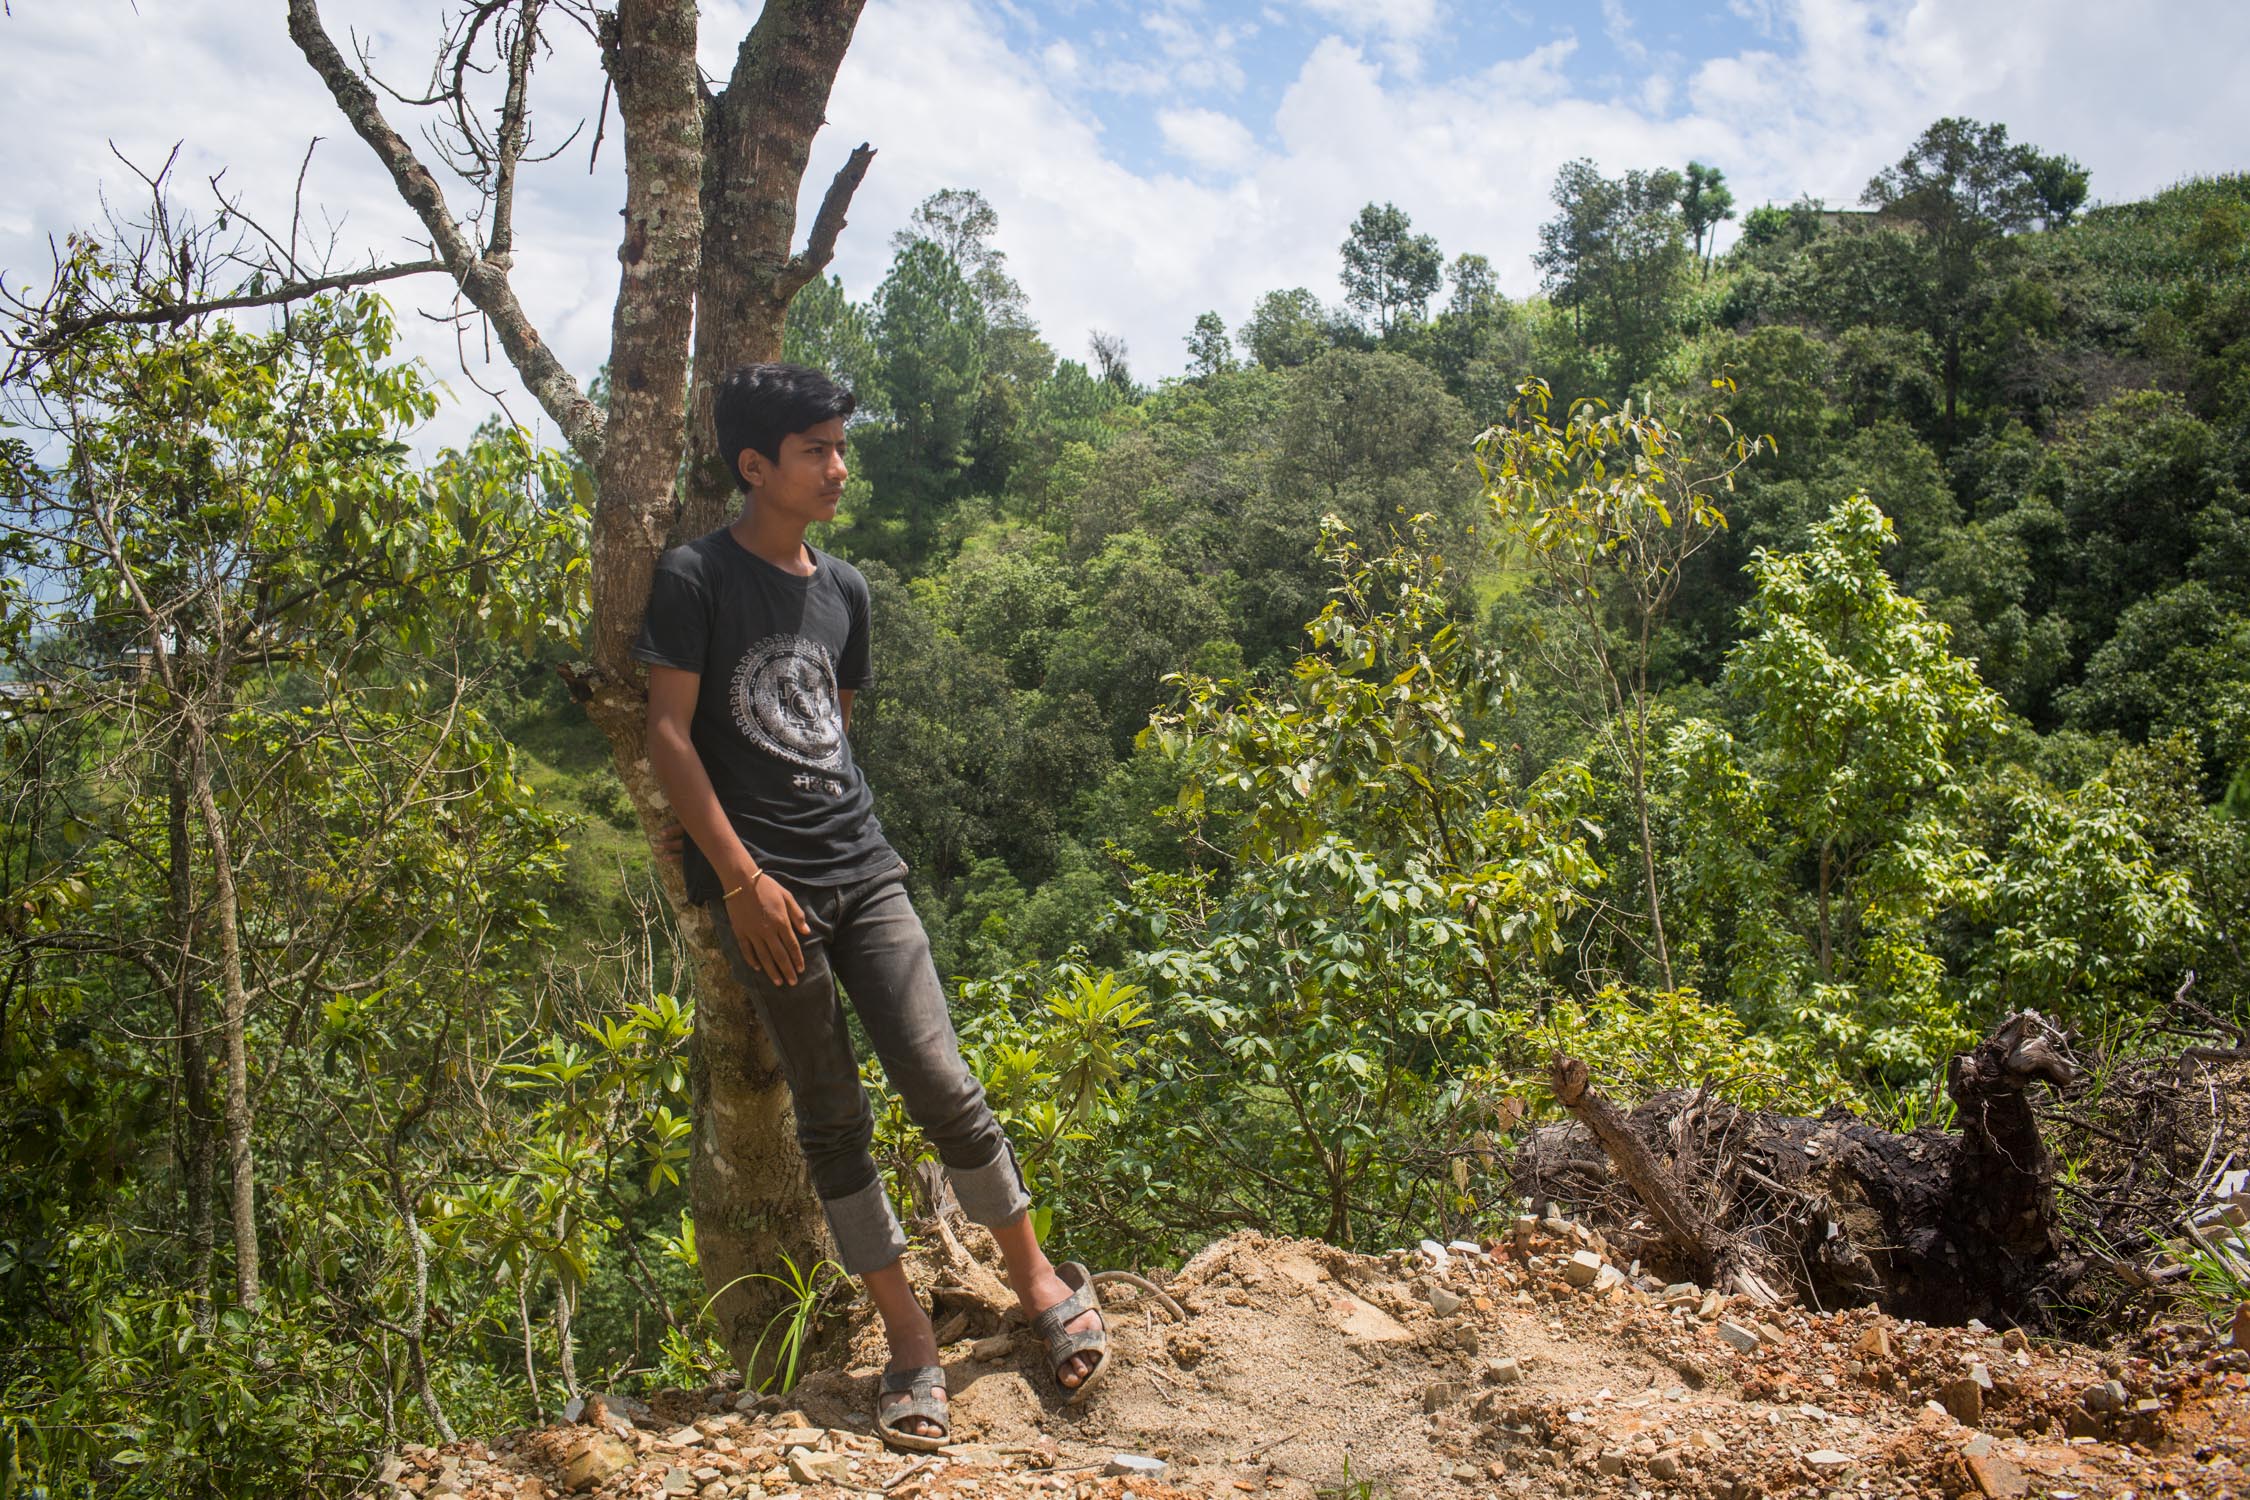 Sunil Sundas, a school student from Timal, Kavre, hope that the Bodhichitta trees that is growing in his family land will feed his family in future.